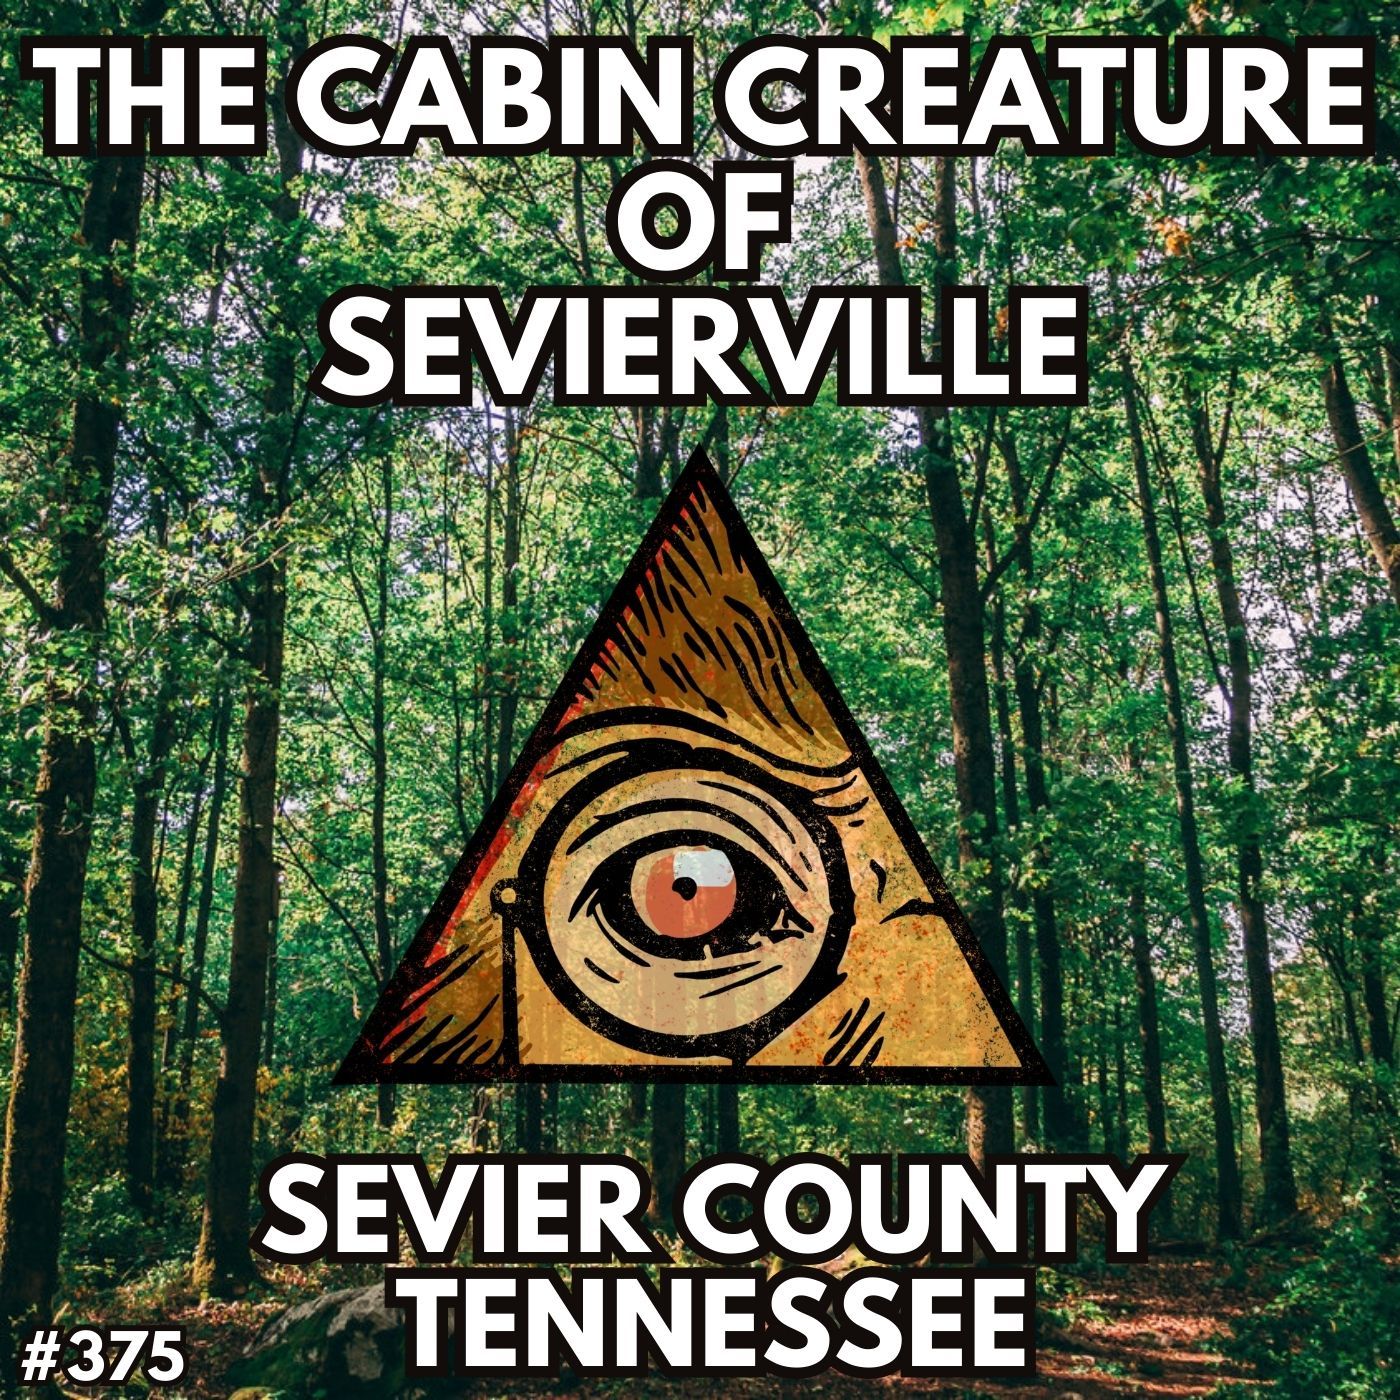 The Cabin Creature of Sevierville, Tennessee